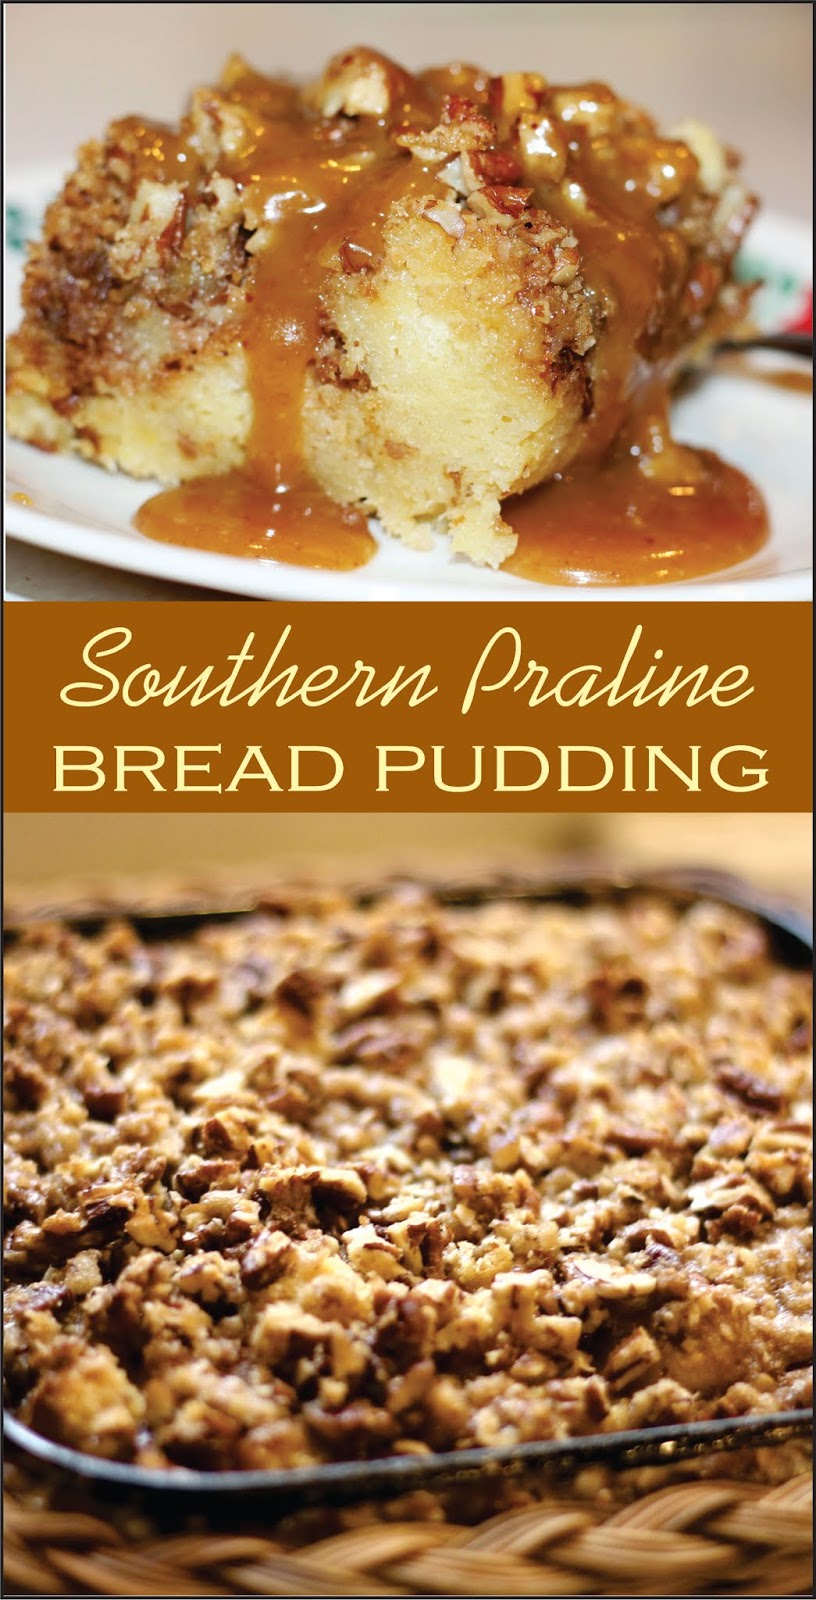 Cooking With Mary and Friends: Southern Praline Bread Pudding